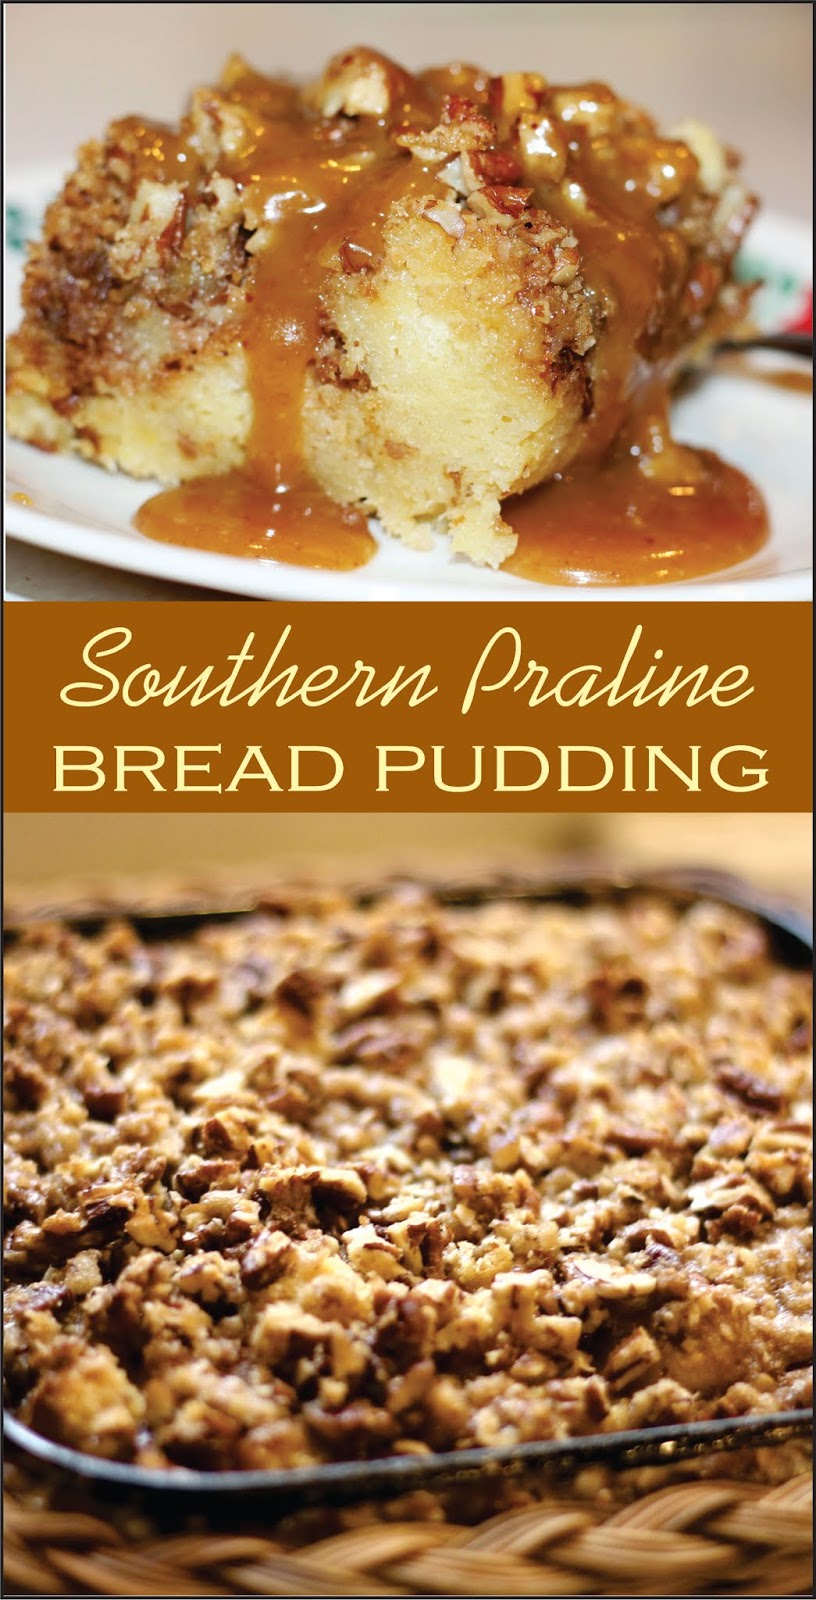 Cooking With Mary and Friends: Southern Praline Bread Pudding